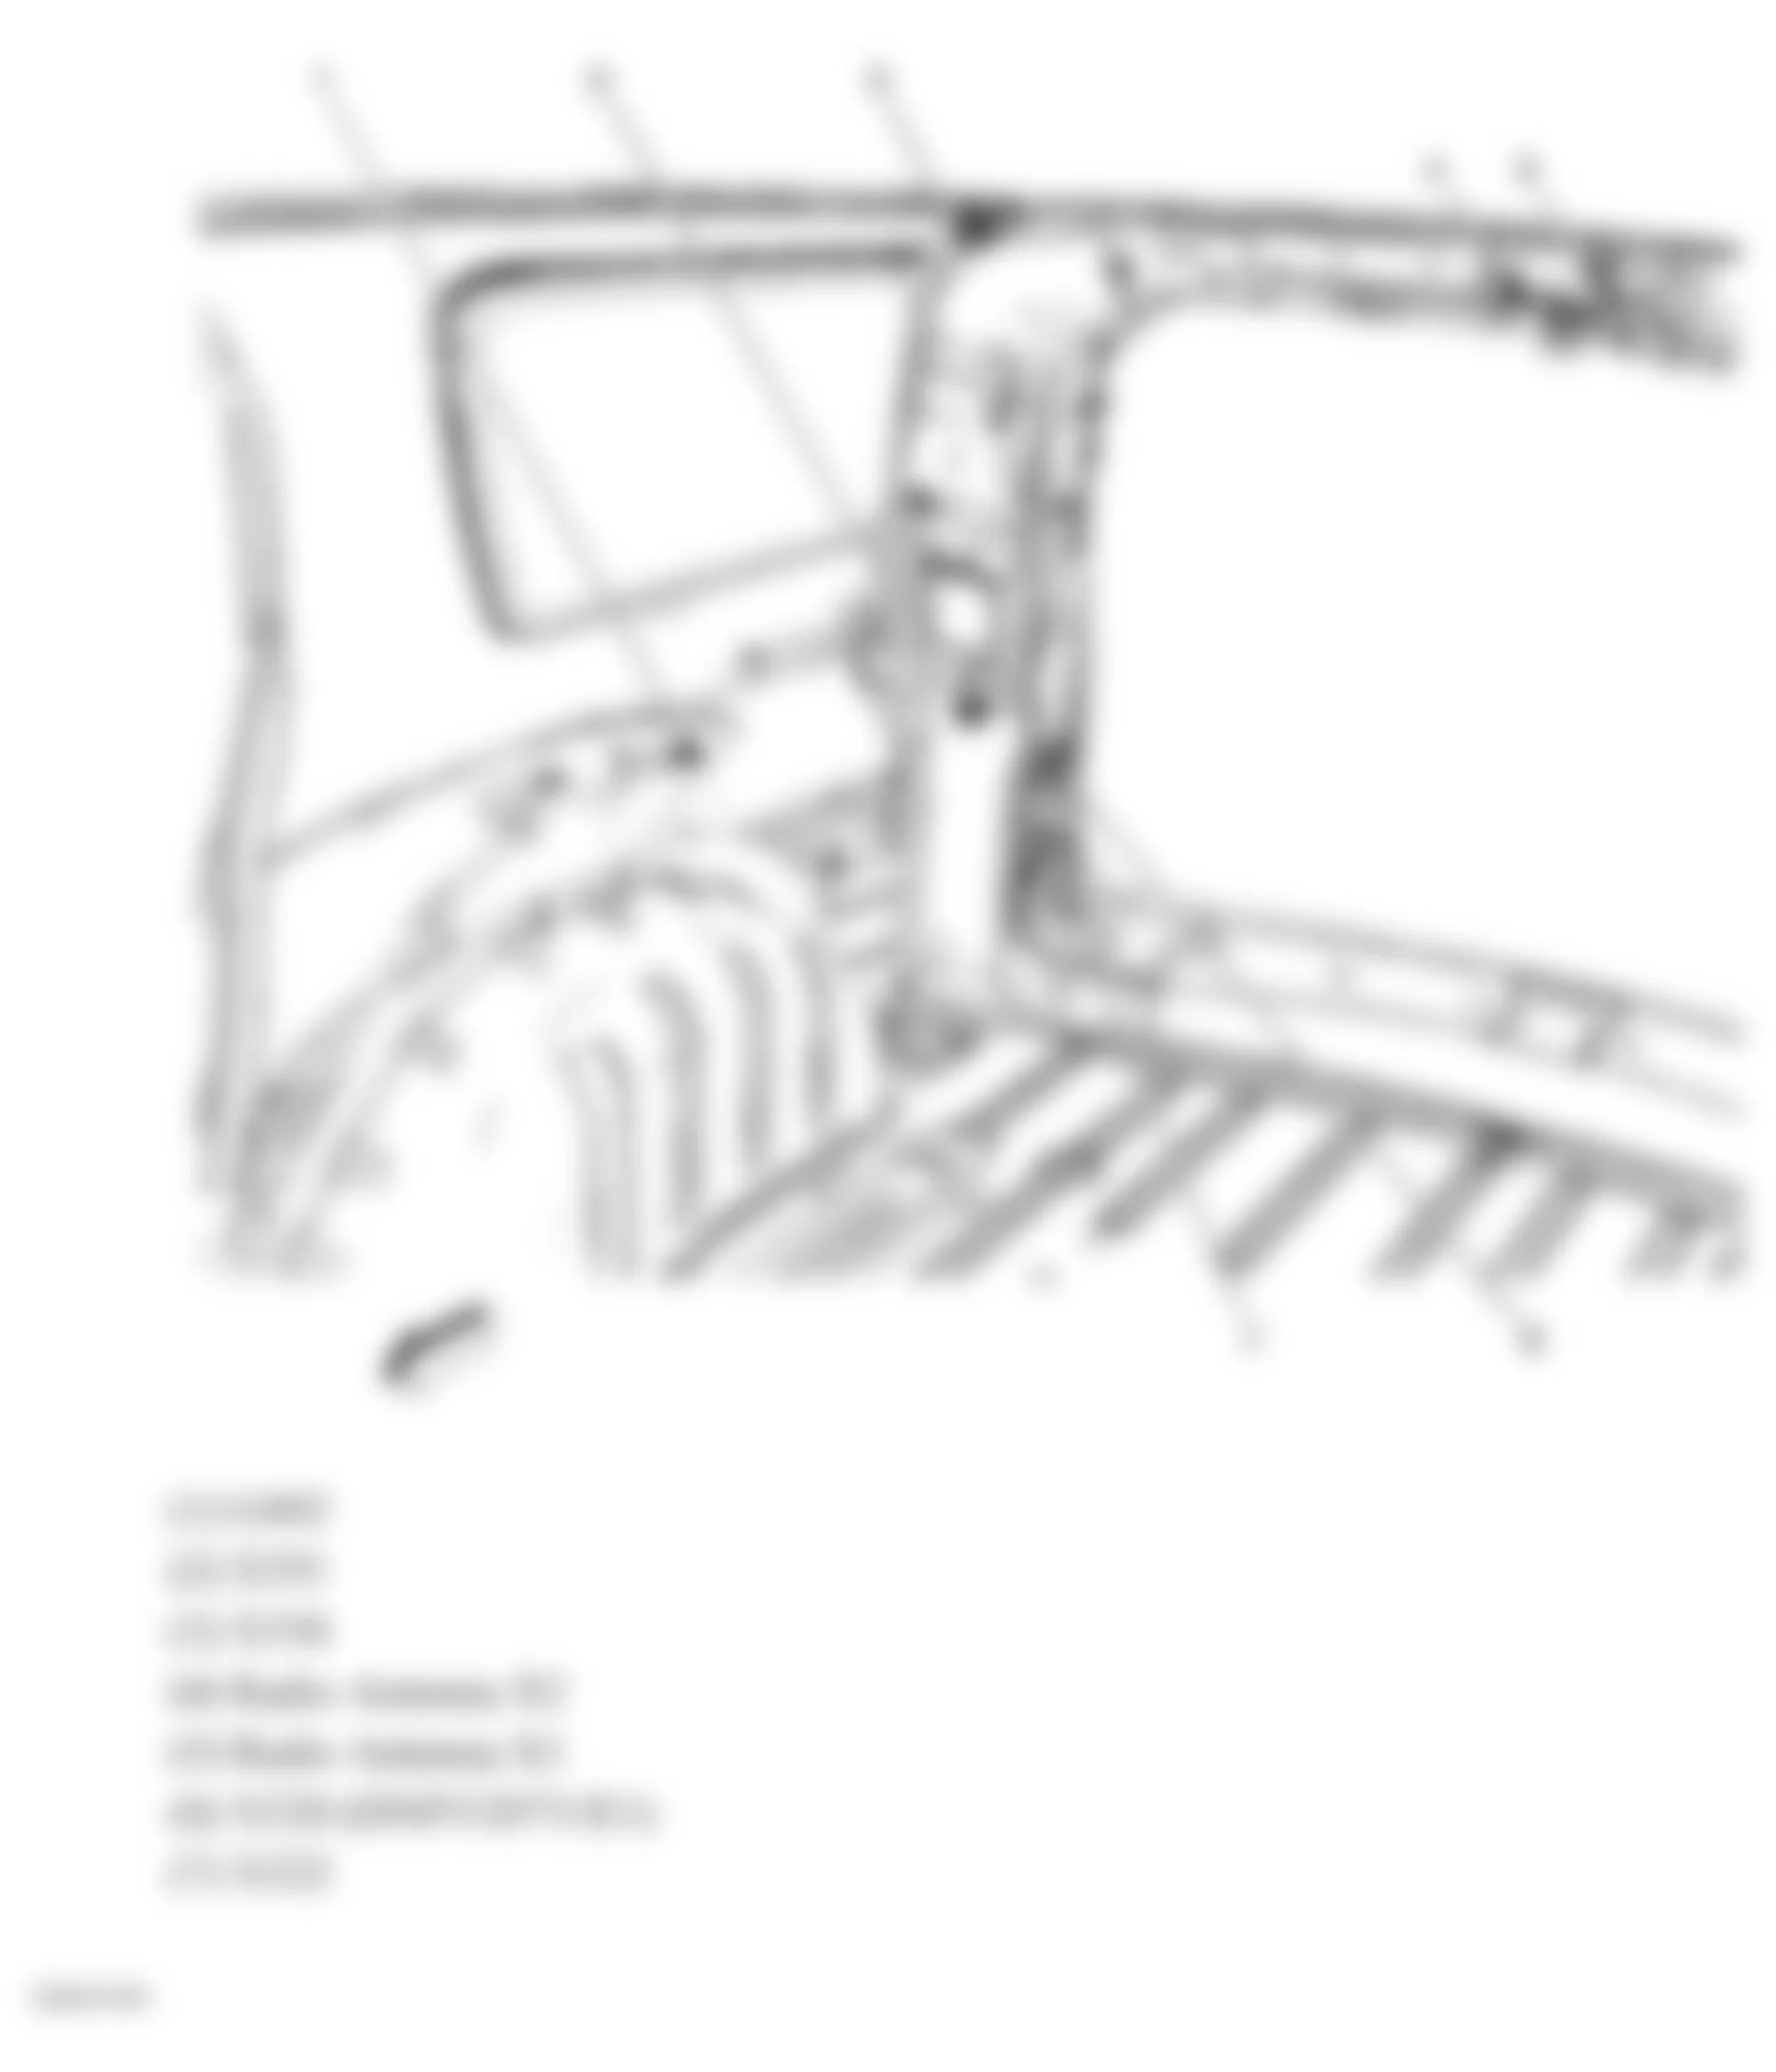 GMC Acadia SLE 2007 - Component Locations -  Right Rear Of Passenger Compartment